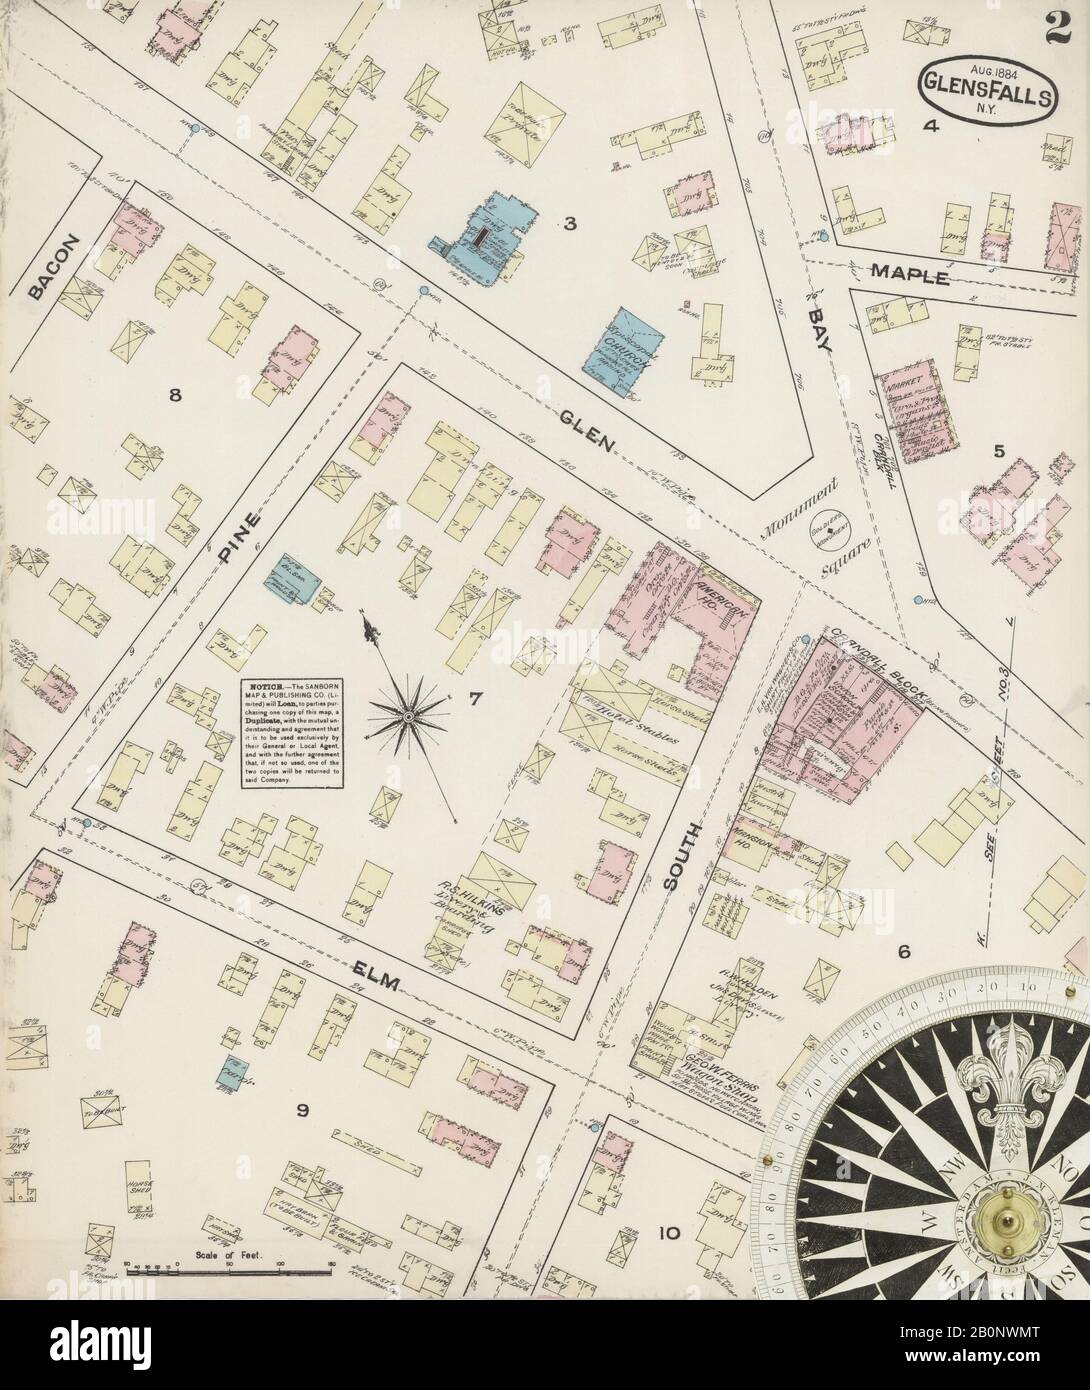 Image 2 of Sanborn Fire Insurance Map from Glens Falls, Warren County, New York. Aug 1884. 9 Sheet(s), America, street map with a Nineteenth Century compass Stock Photo